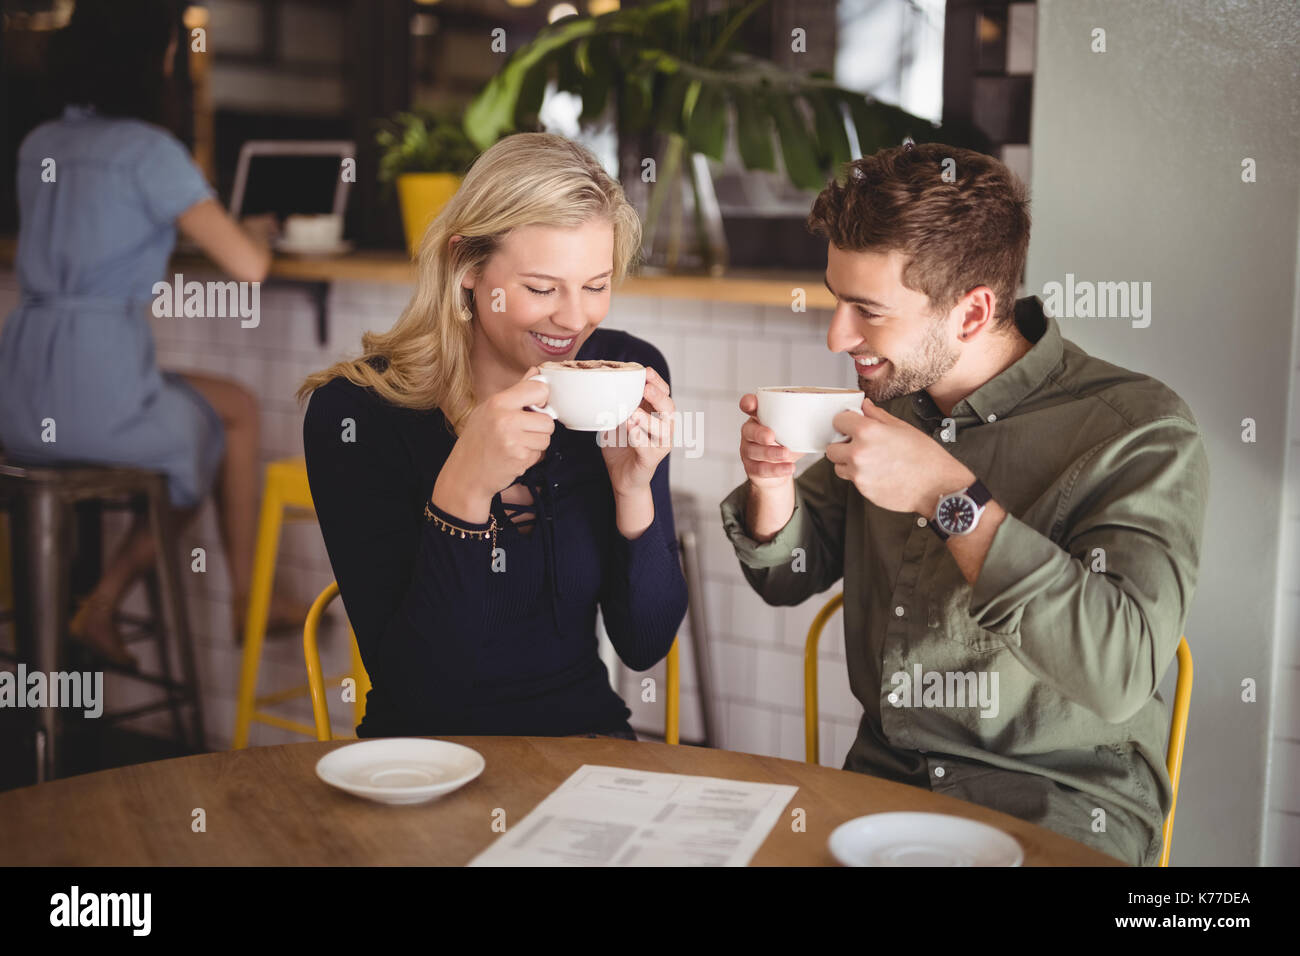 Smiling young couple drinking coffee while sitting at table in cafe Banque D'Images